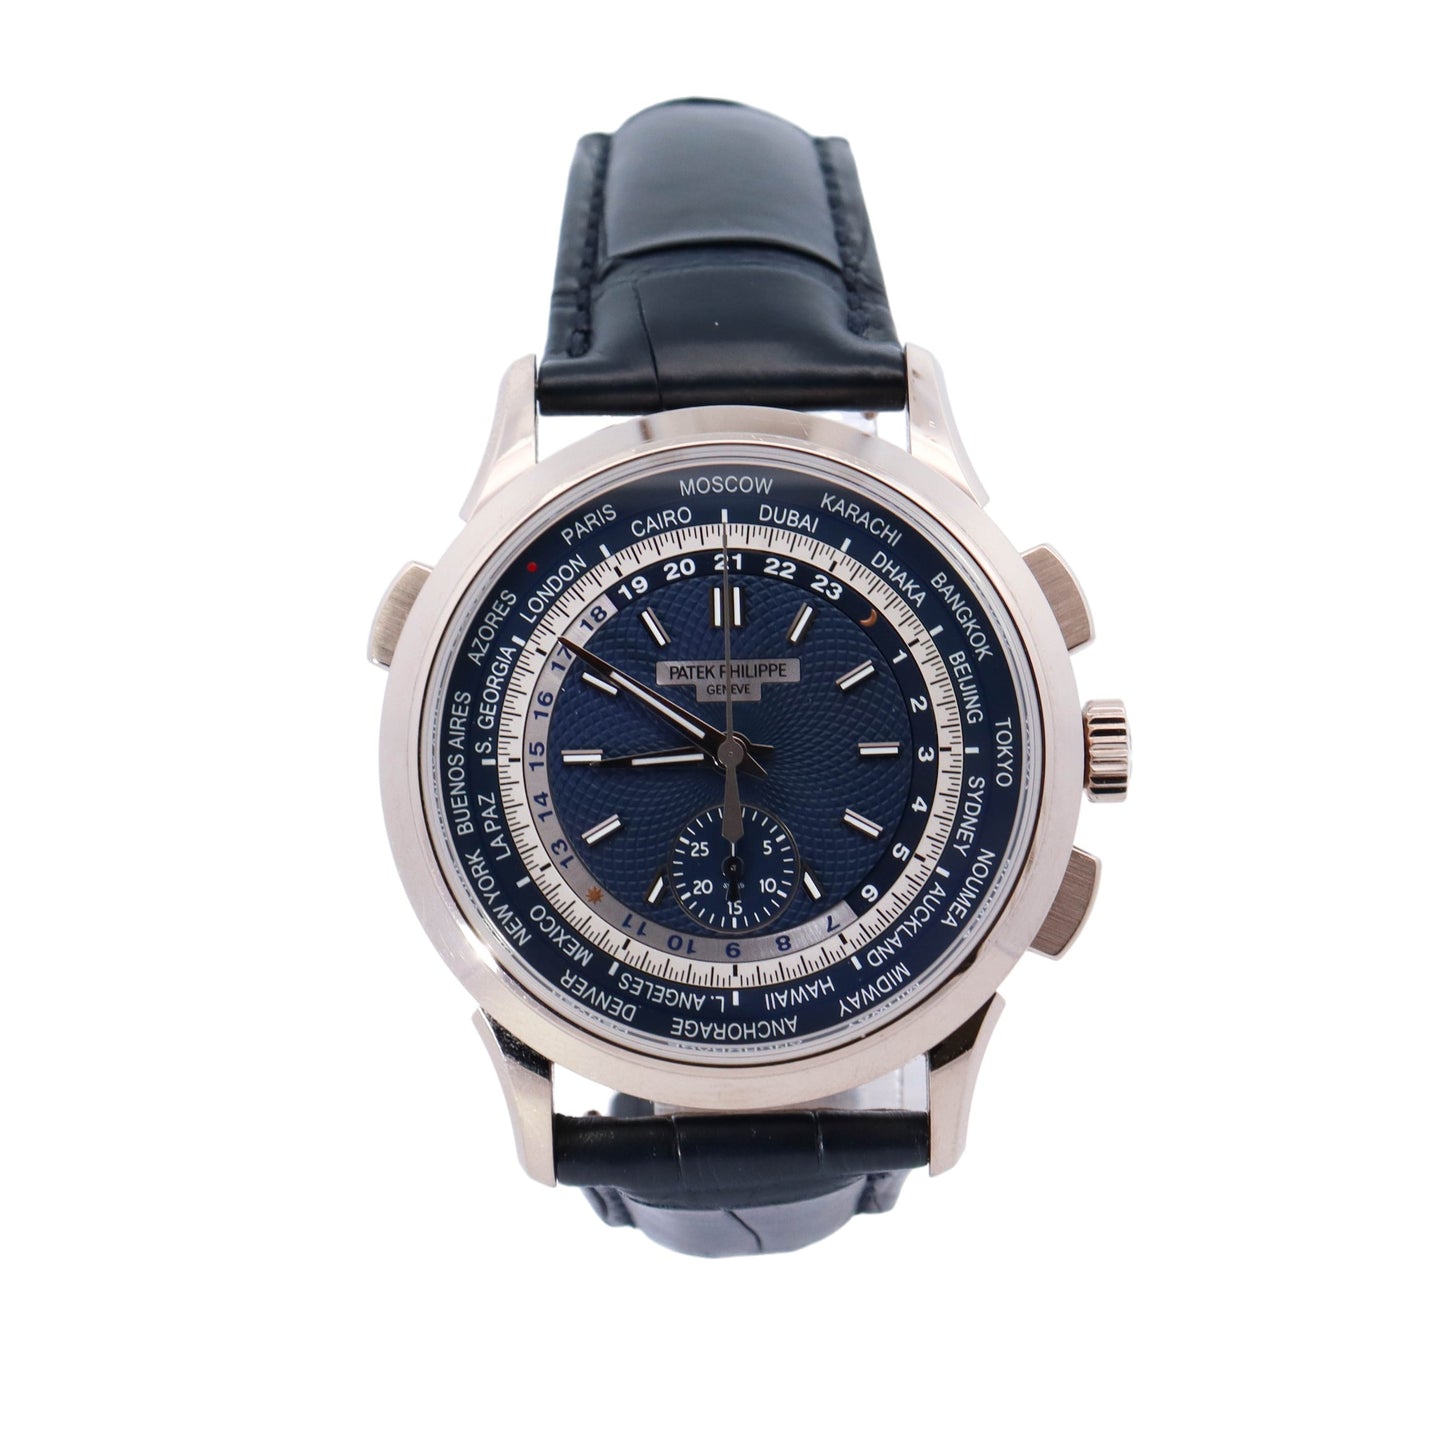 Patek Philippe World Time Chronograph 39.5mm Blue Stick Dial Watch Reference# 5930G-010